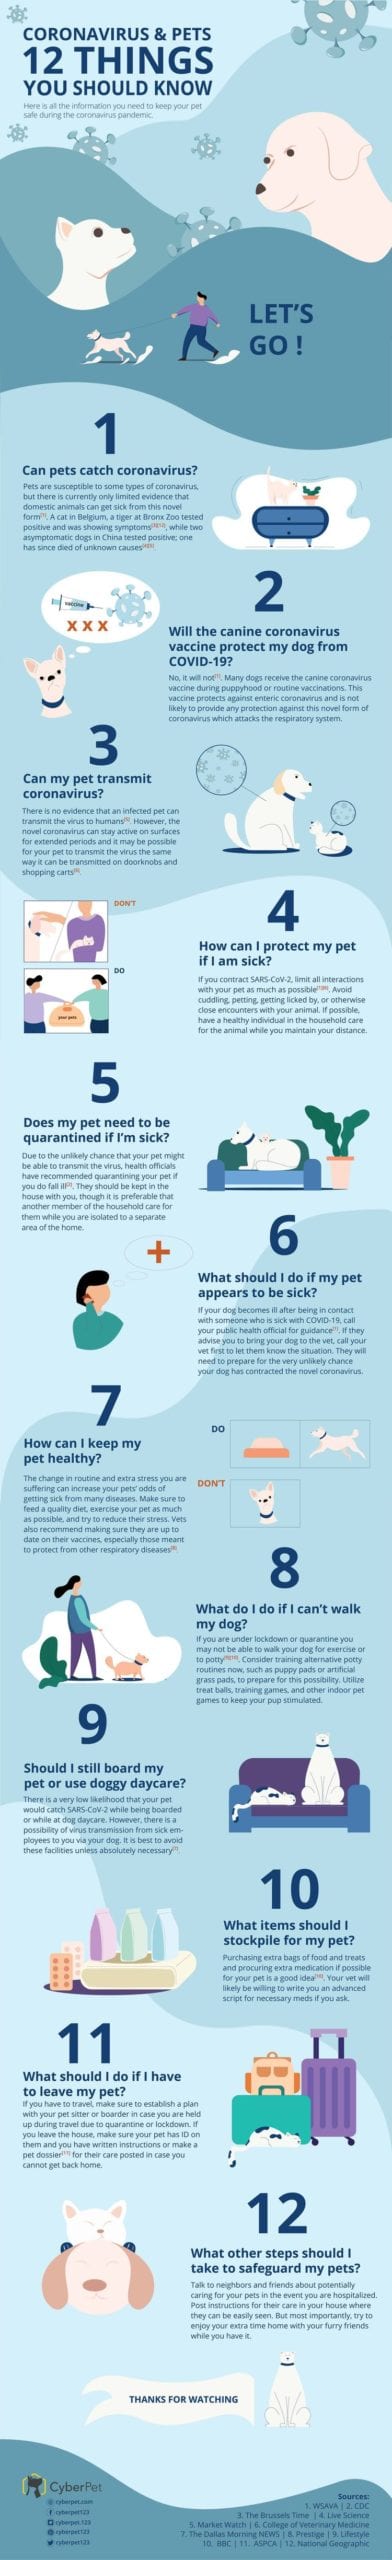 12 frequently asked questions about COVID-19 and pets